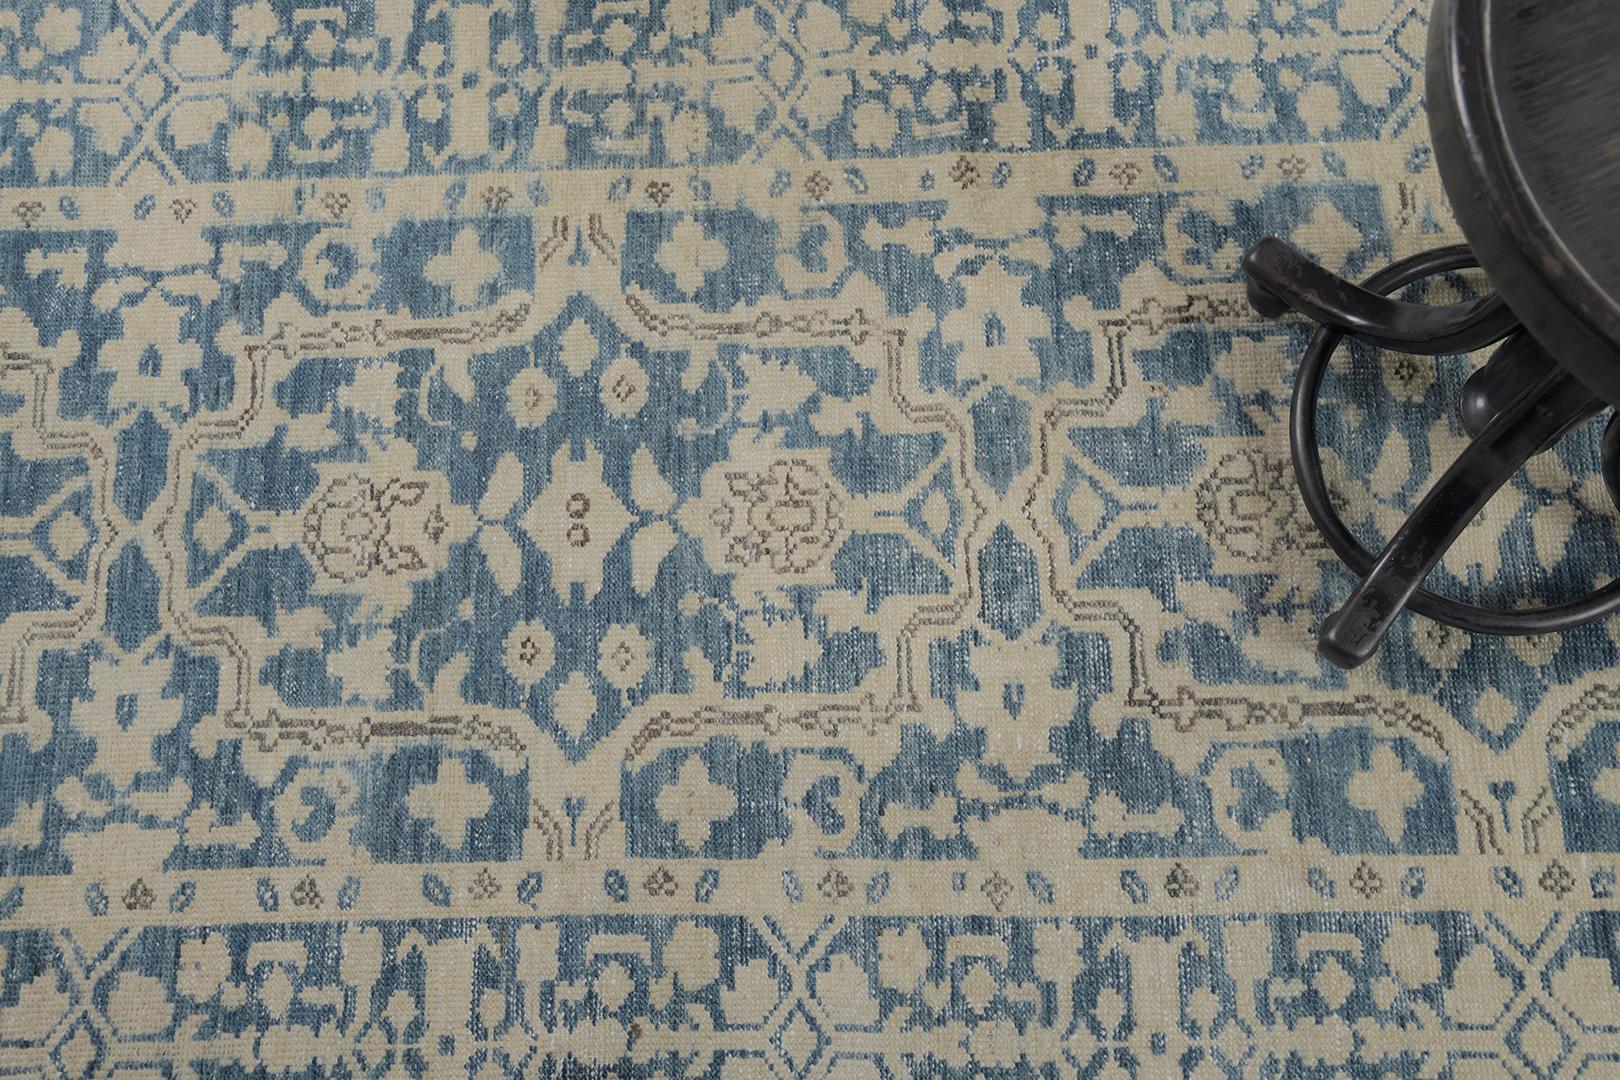 This majestic revival Persian Malayer vintage rug comes from a handmade finest wool that features neutral-toned symmetrical florid elements, glorious foliage, and stylized motifs over the midnight blue field. With its impressive pattern, it is easy